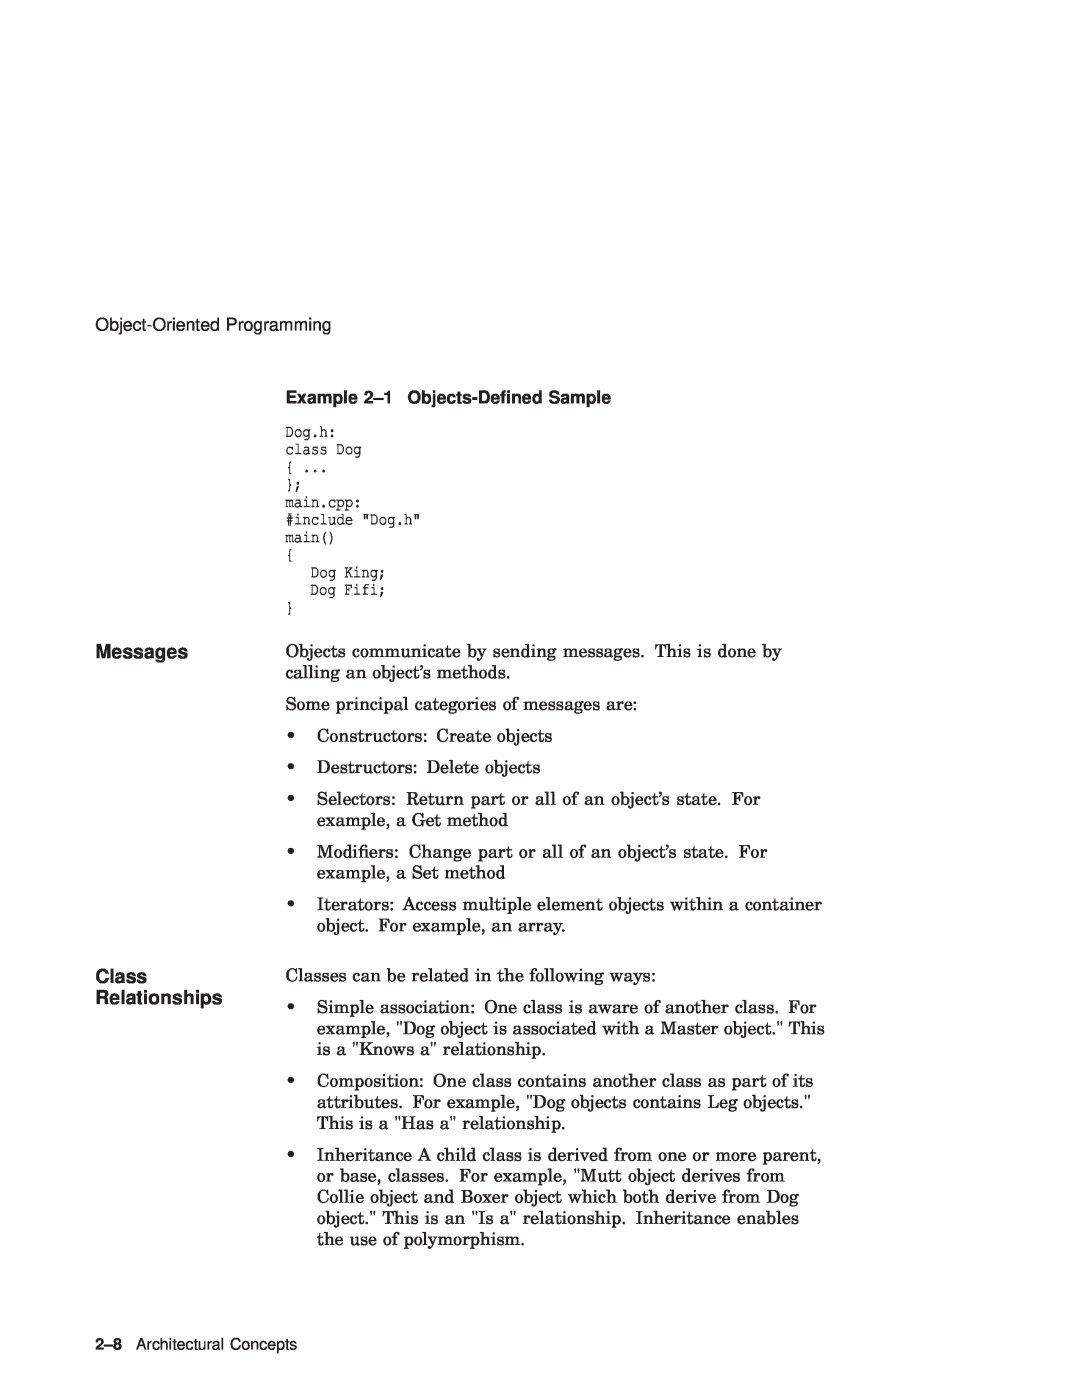 Compaq Reliable Transaction Router manual Messages Class Relationships, Example 2-1 Objects-Deﬁned Sample 